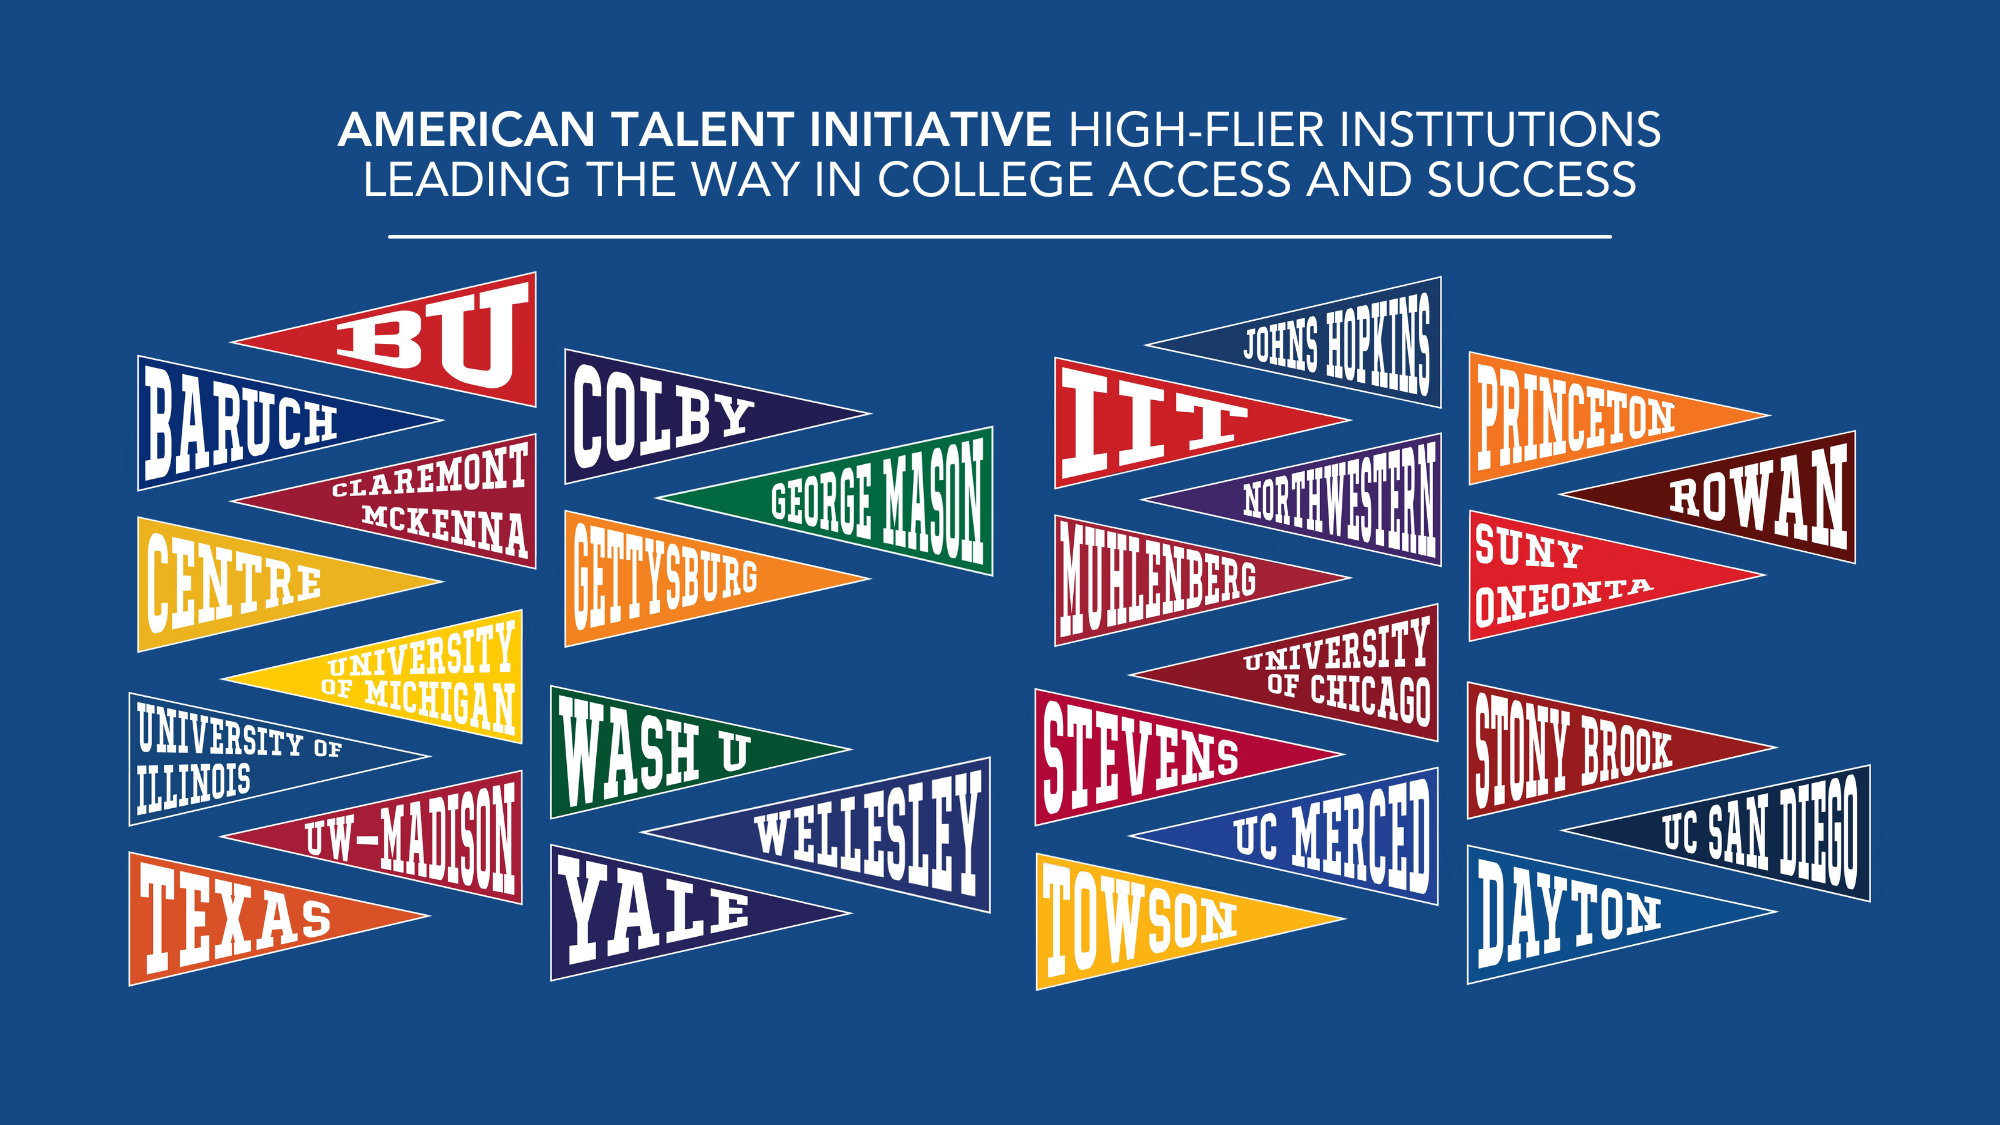 Bloomberg Philanthropies Recognizes 28 Colleges and Universities as  American Talent Initiative High-Fliers for Transformative Leadership in  College Access and Success for Lower-Income Students